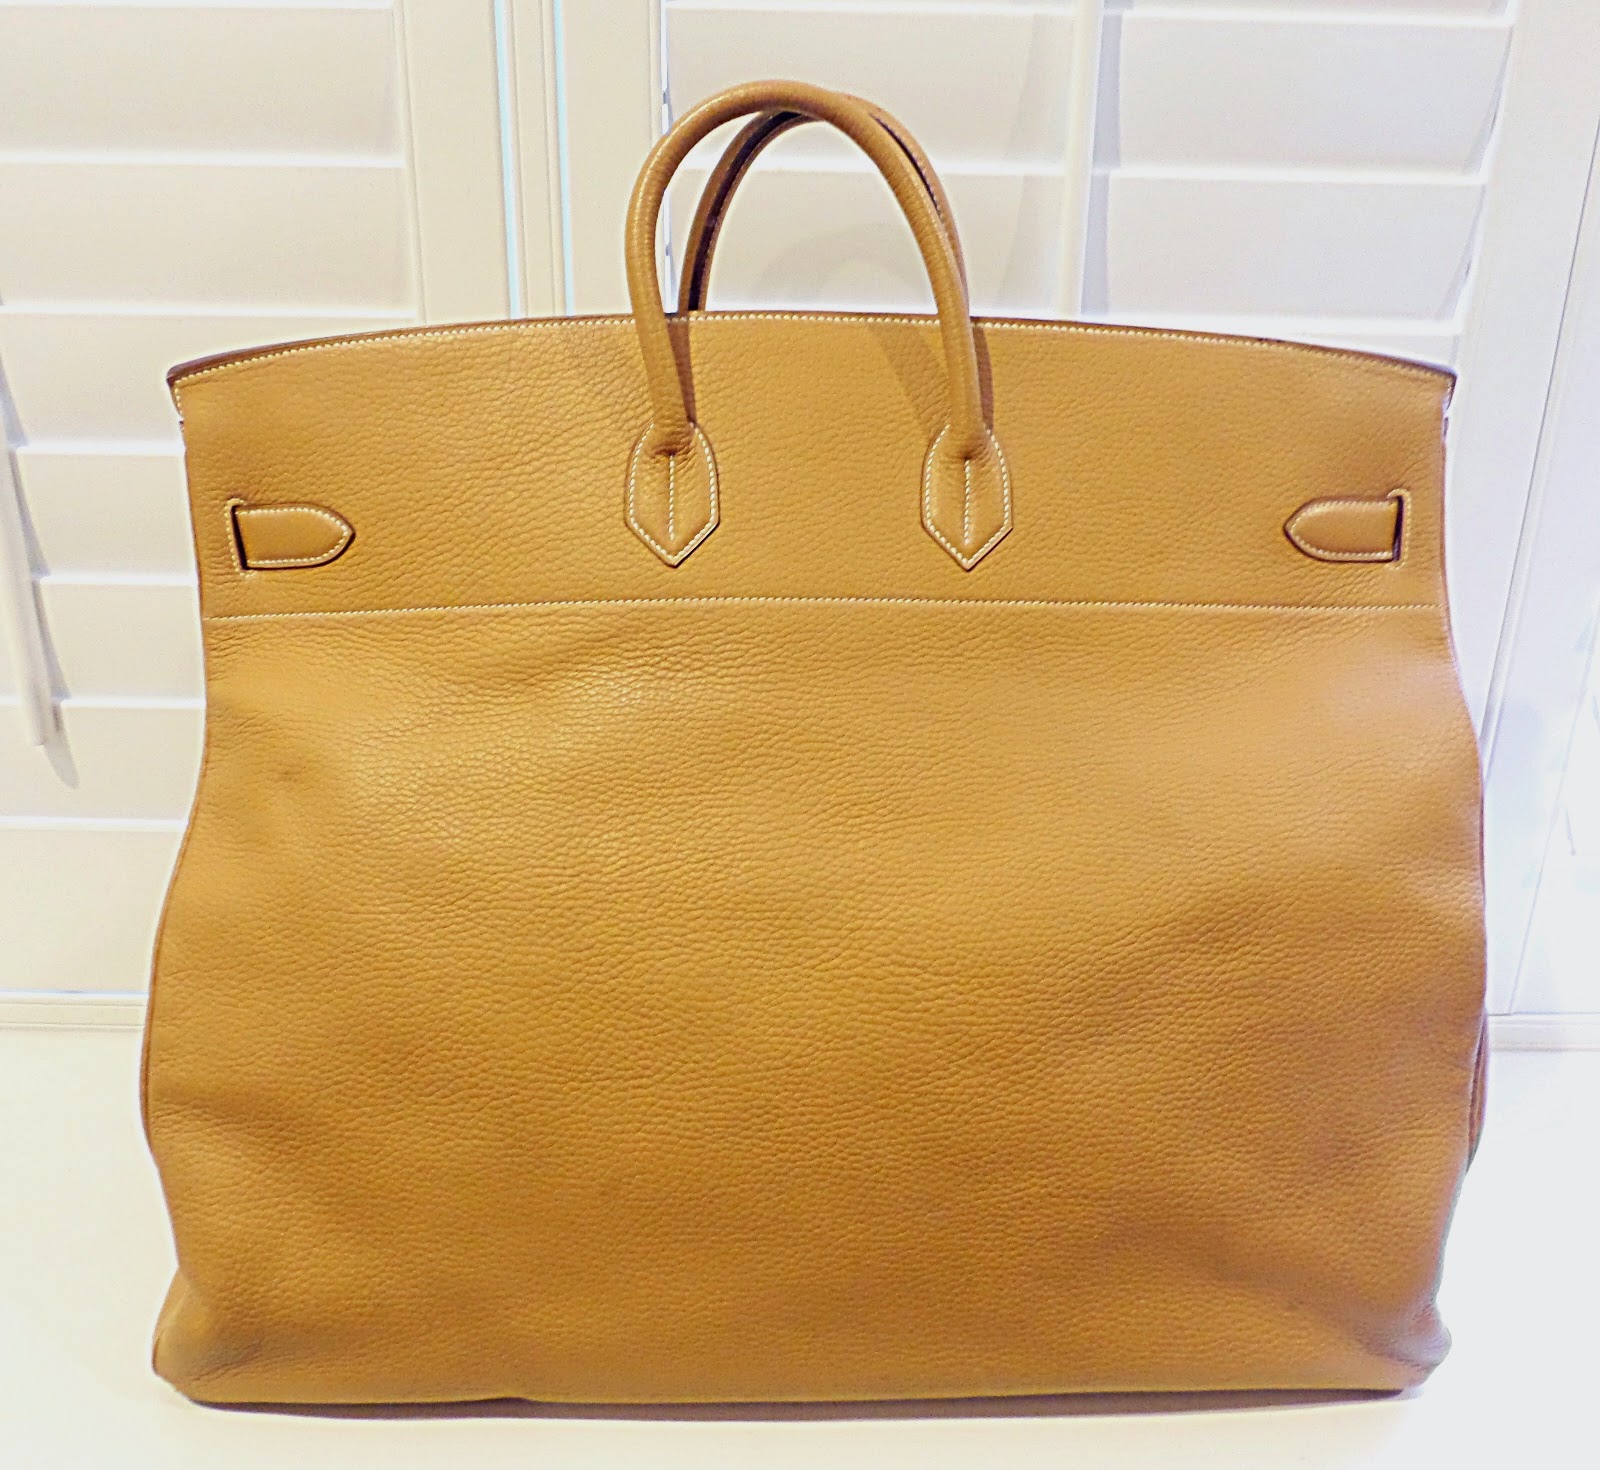 Vancouver Luxury Designer Consignment Shop: Shop, Buy, Sell authentic Hermes Birkin, HAC, Kelly ...